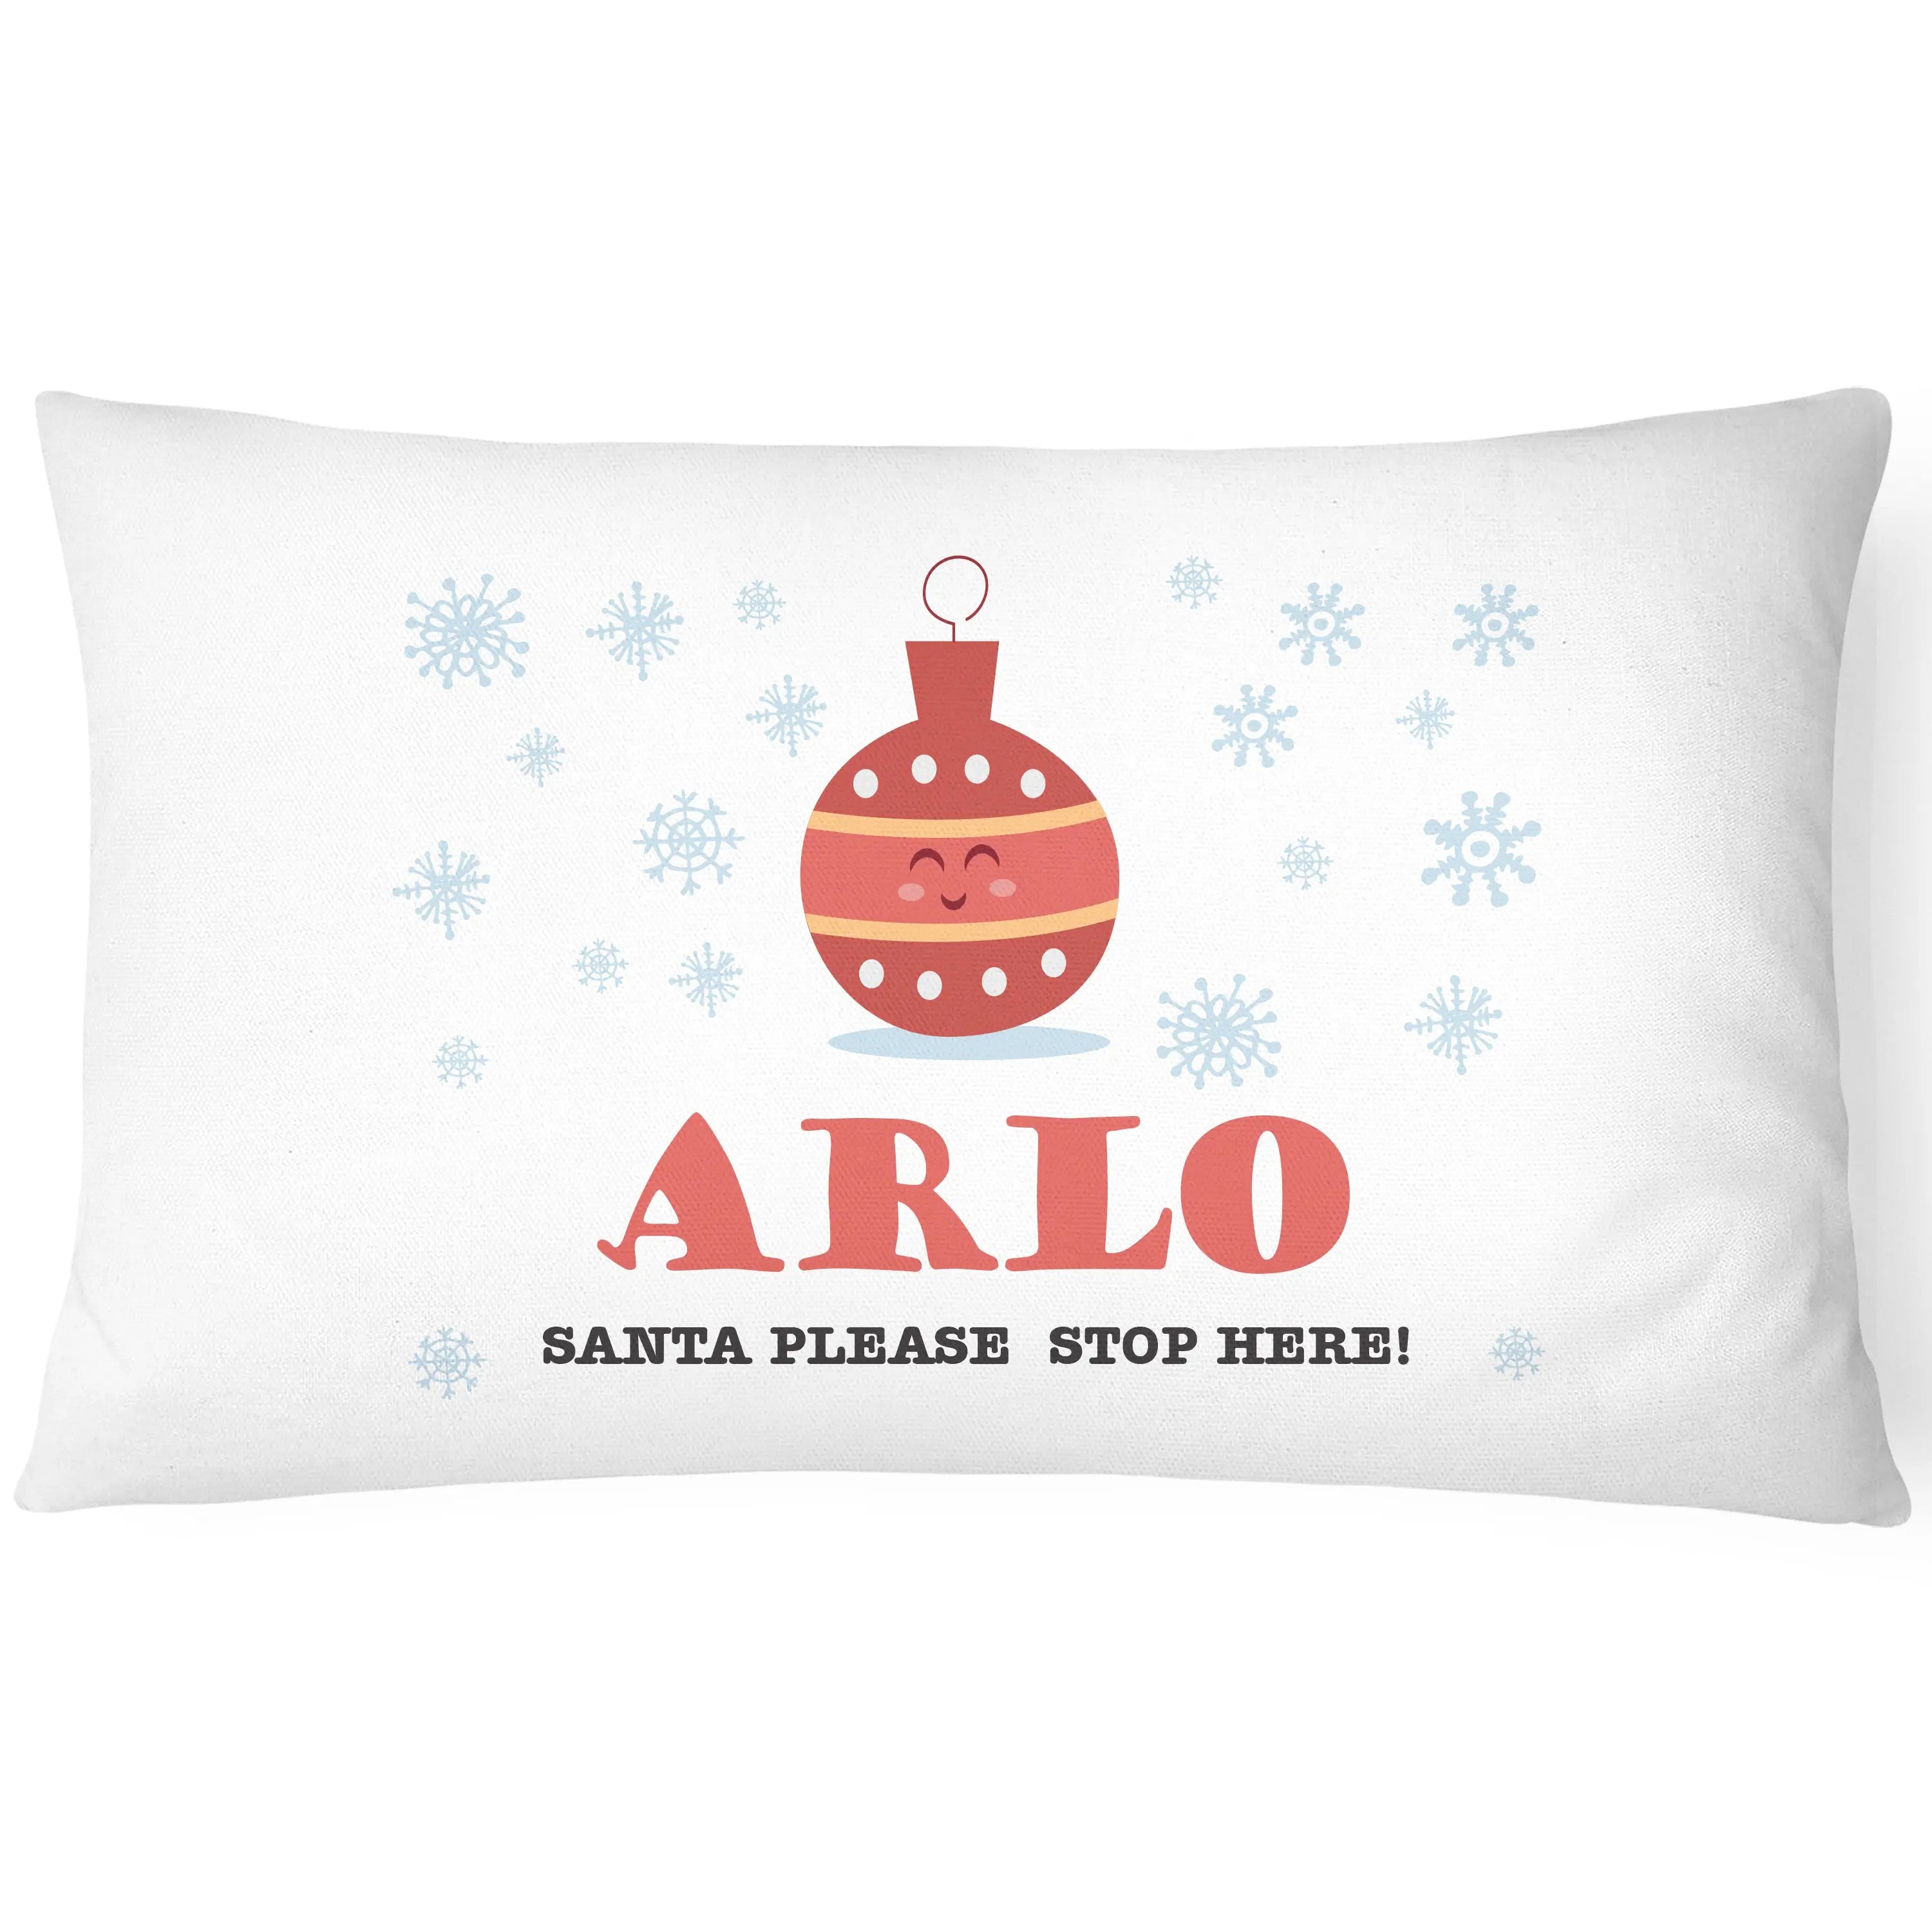 Christmas Pillowcase for Kids - Personalise With Any Name - Decor